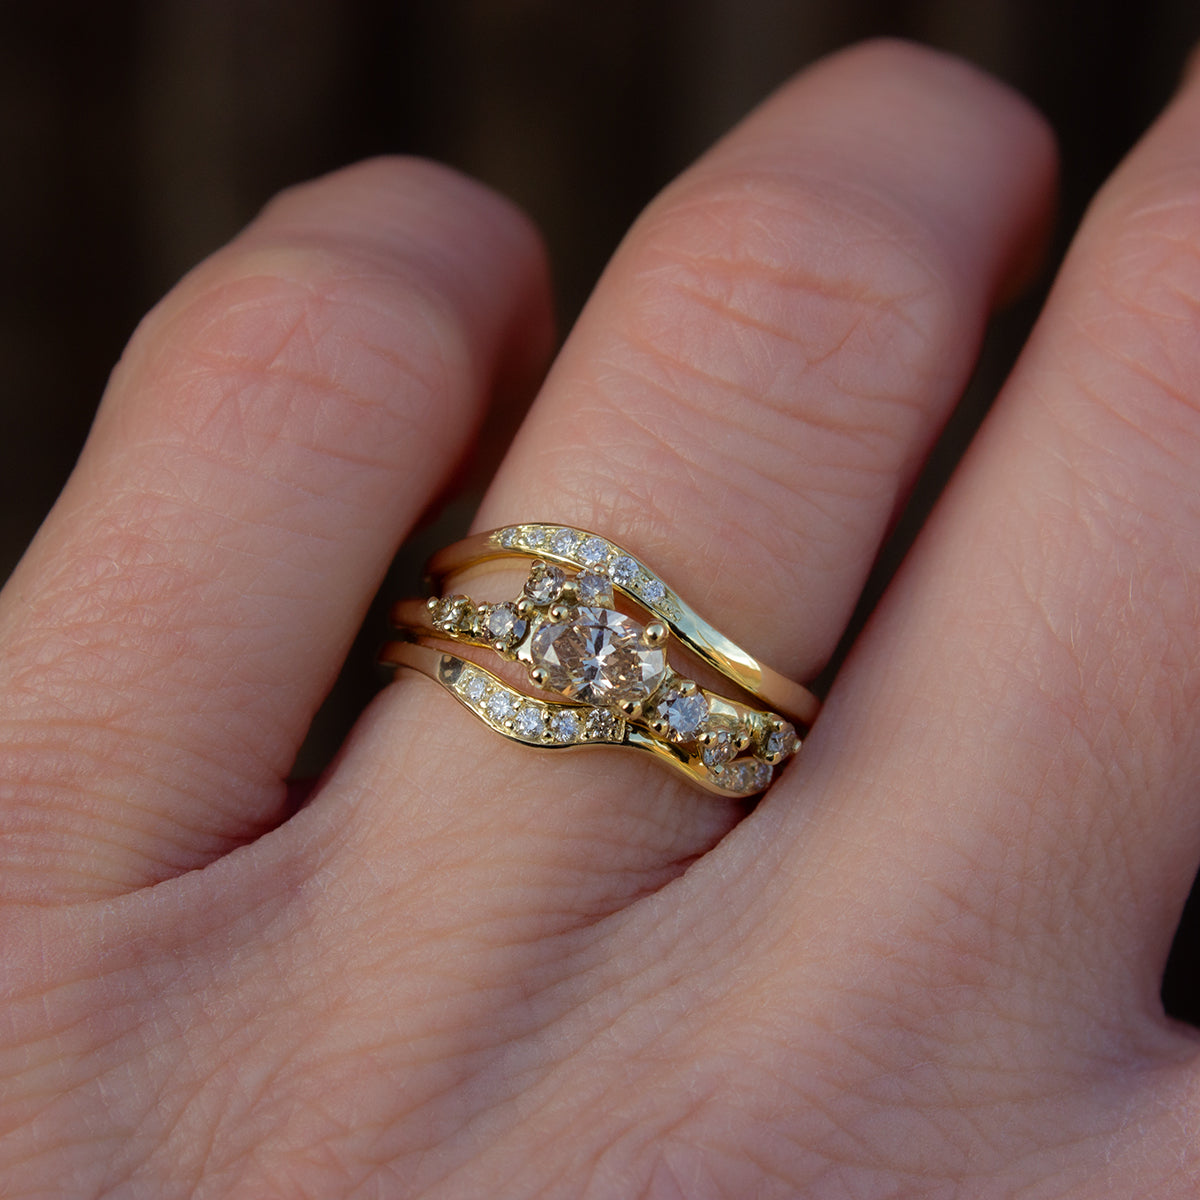 Champagne diamonds engagement ring paired with two organically shaped gold wedding bands with pavé set white diamonds